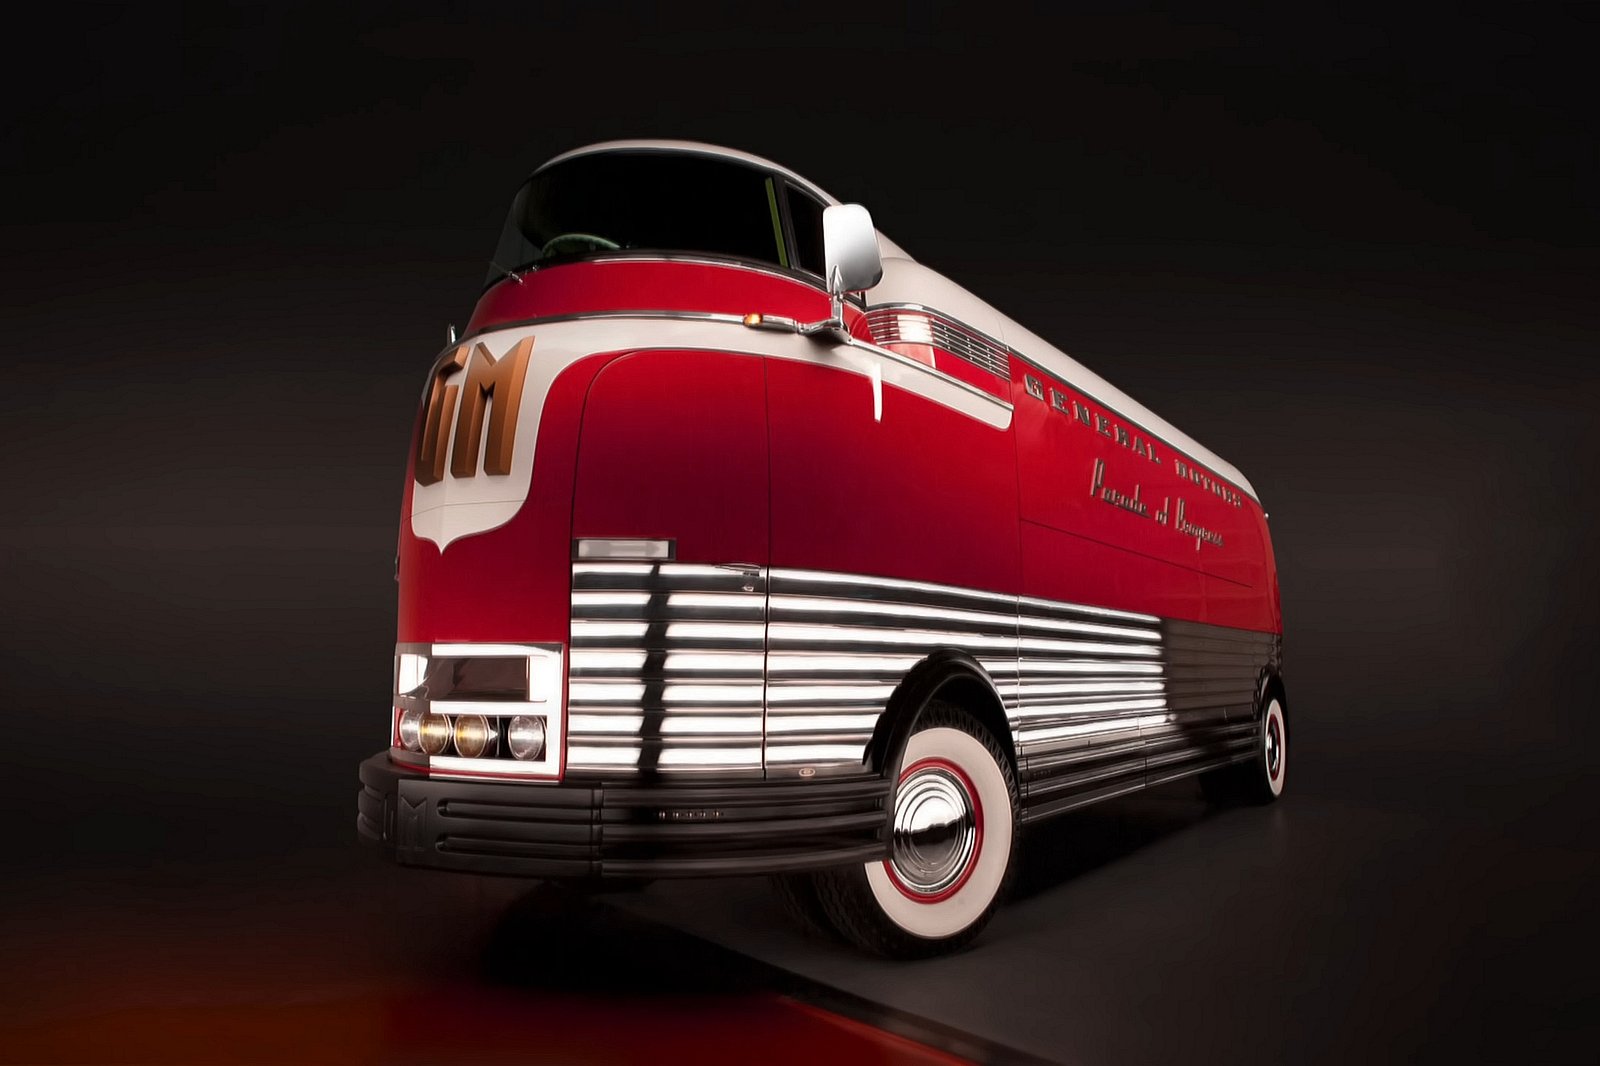 video, gm's futurliner buses are million-dollar pieces of automobile history never to be repeated